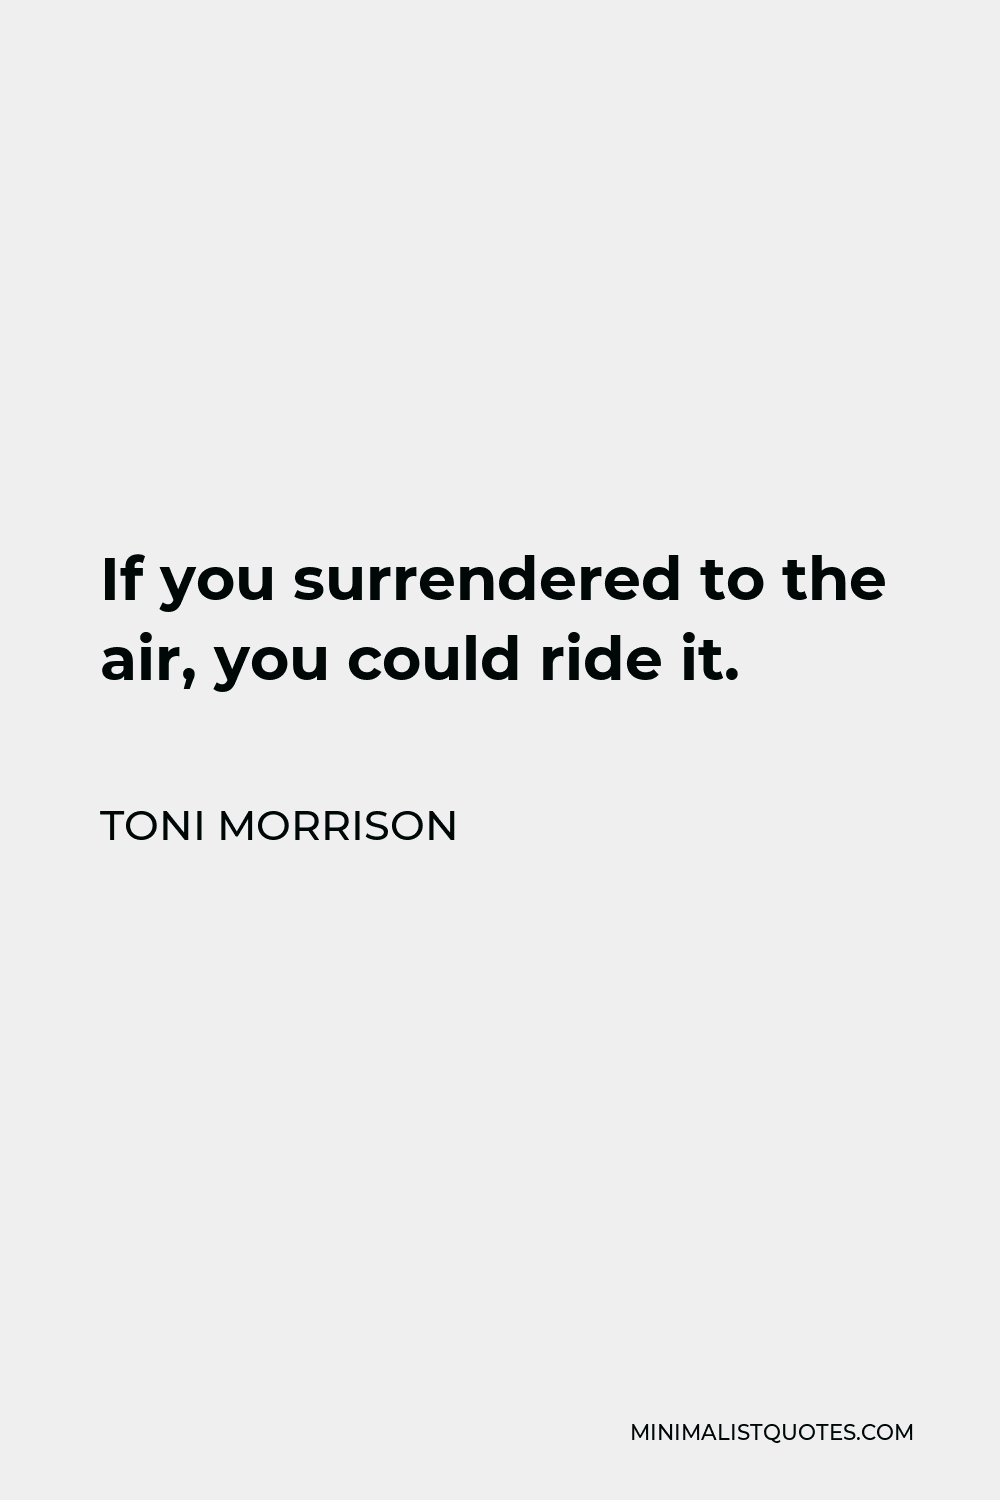 Toni Morrison Quote - If you surrendered to the air, you could ride it.